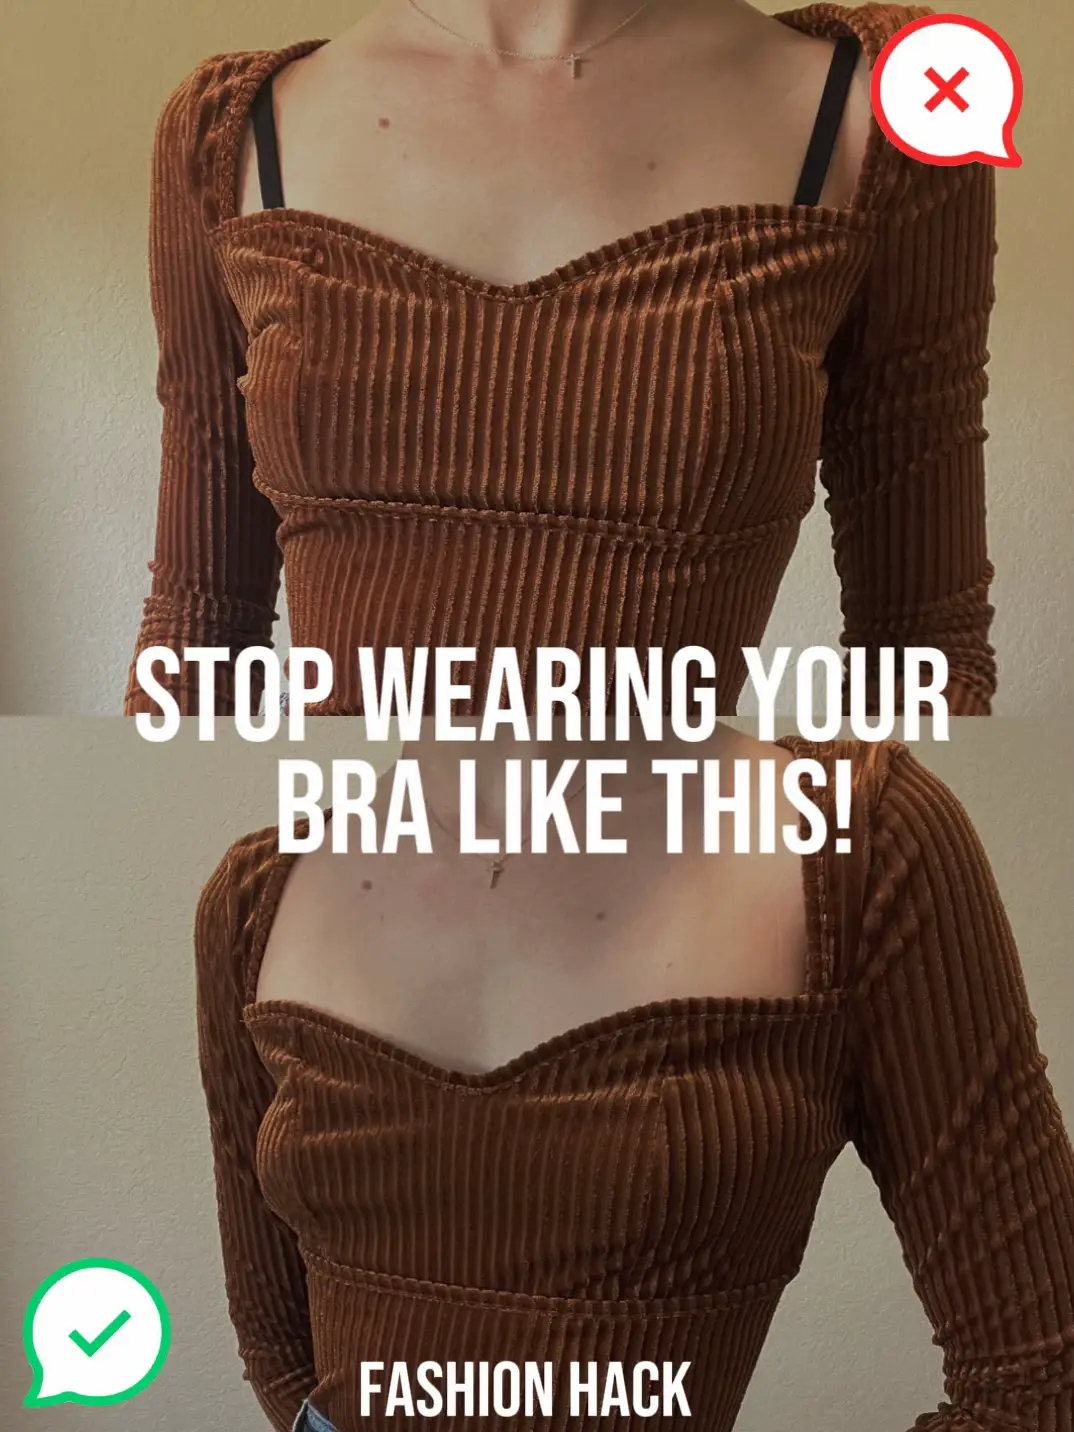 How to Avoid Showing Your Bra When Wearing a Shirt, Gallery posted by  thamysenem